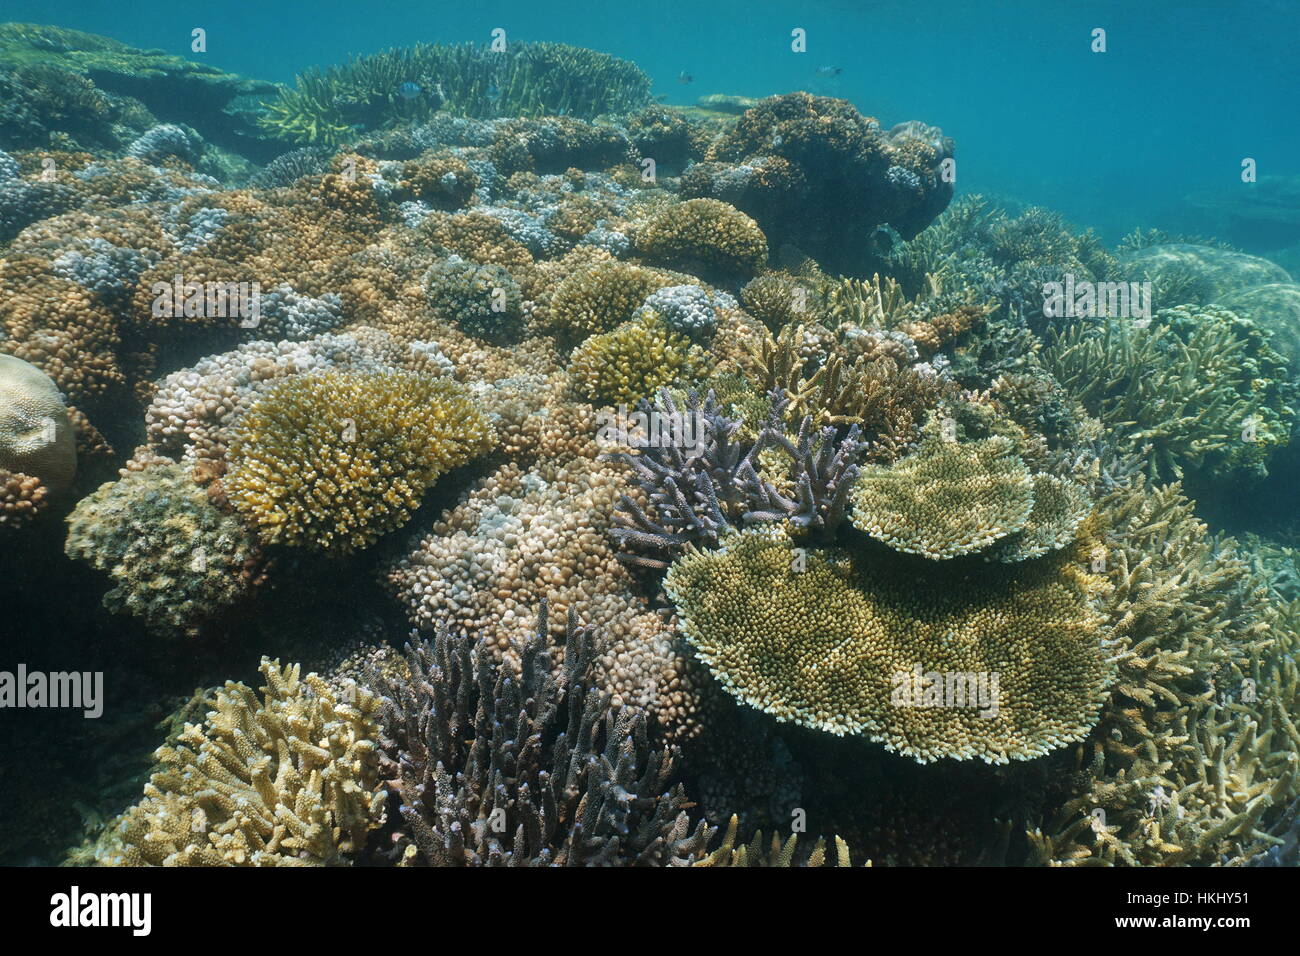 Soft and hard corals underwater on a reef in the lagoon of Grande Terre island, south Pacific ocean, New Caledonia Stock Photo